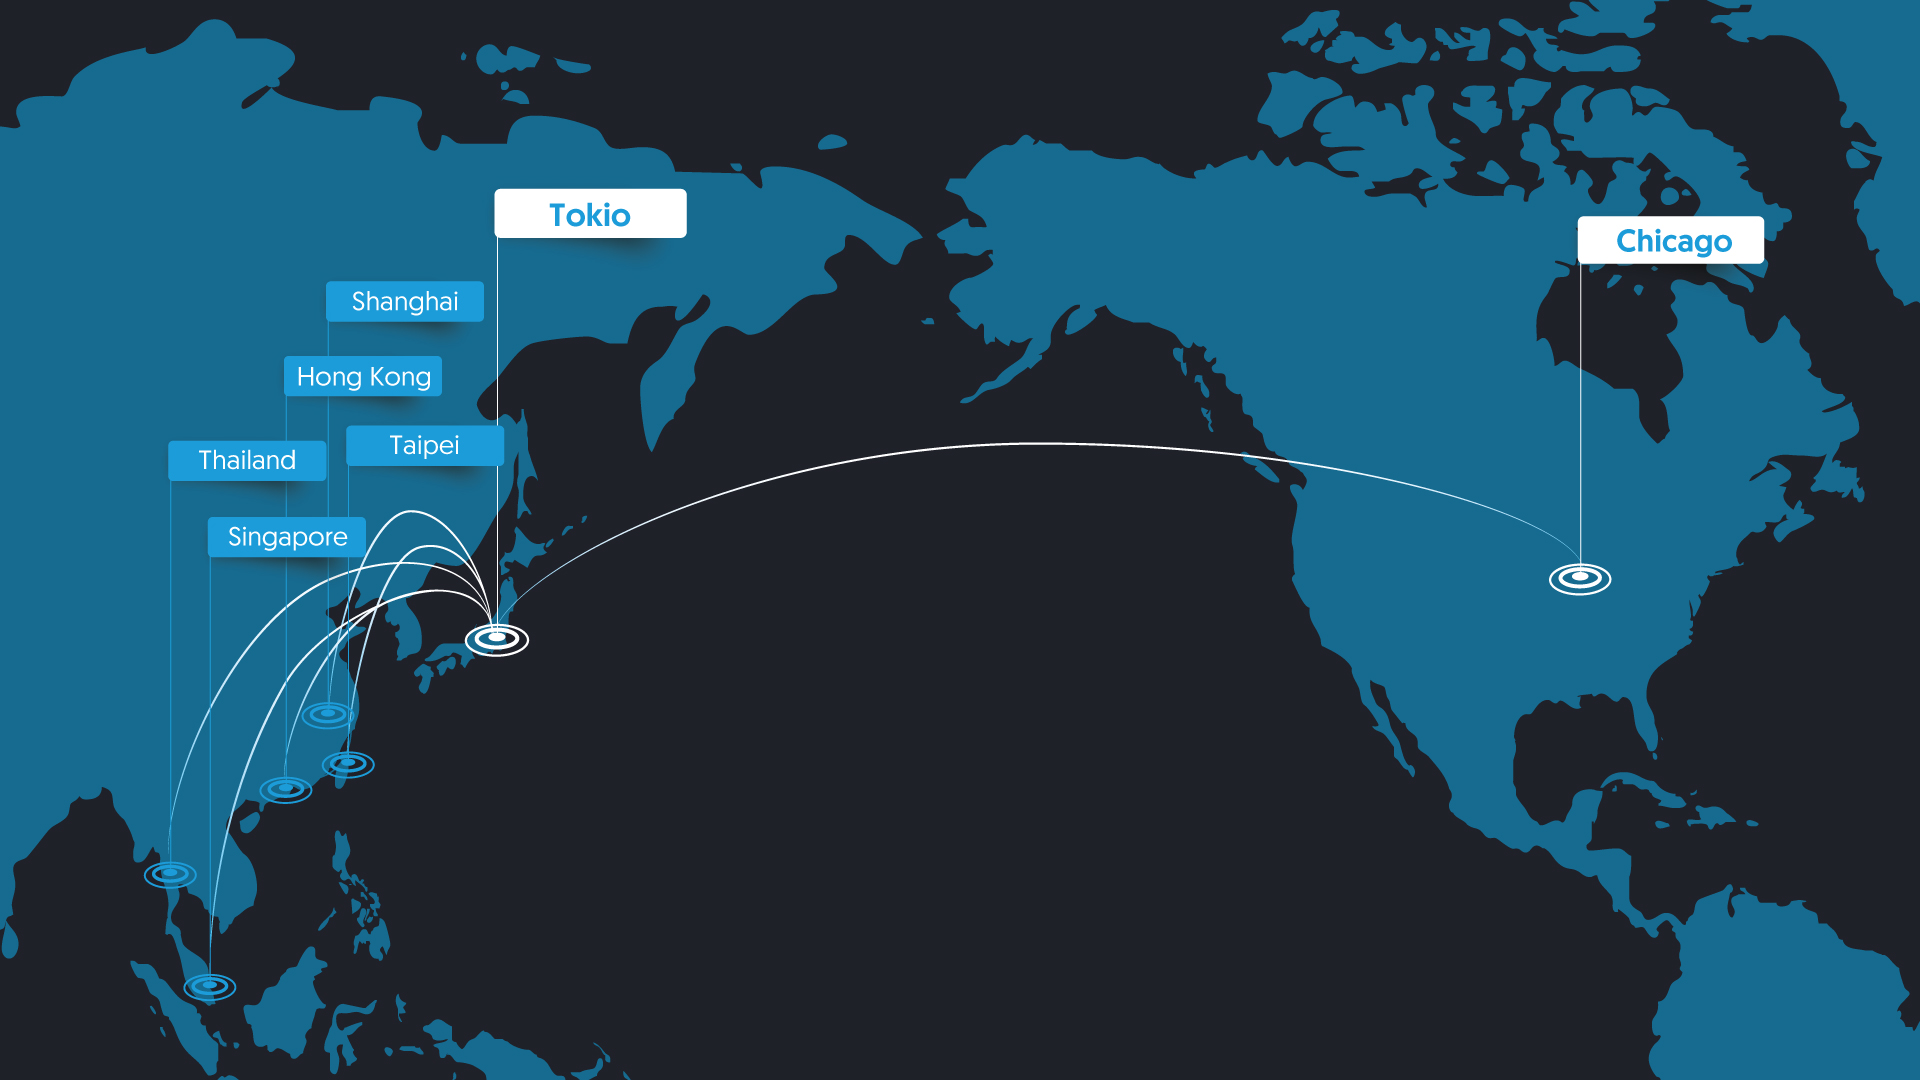 Avelacom is launching new connectivity options between North American and Asian financial markets